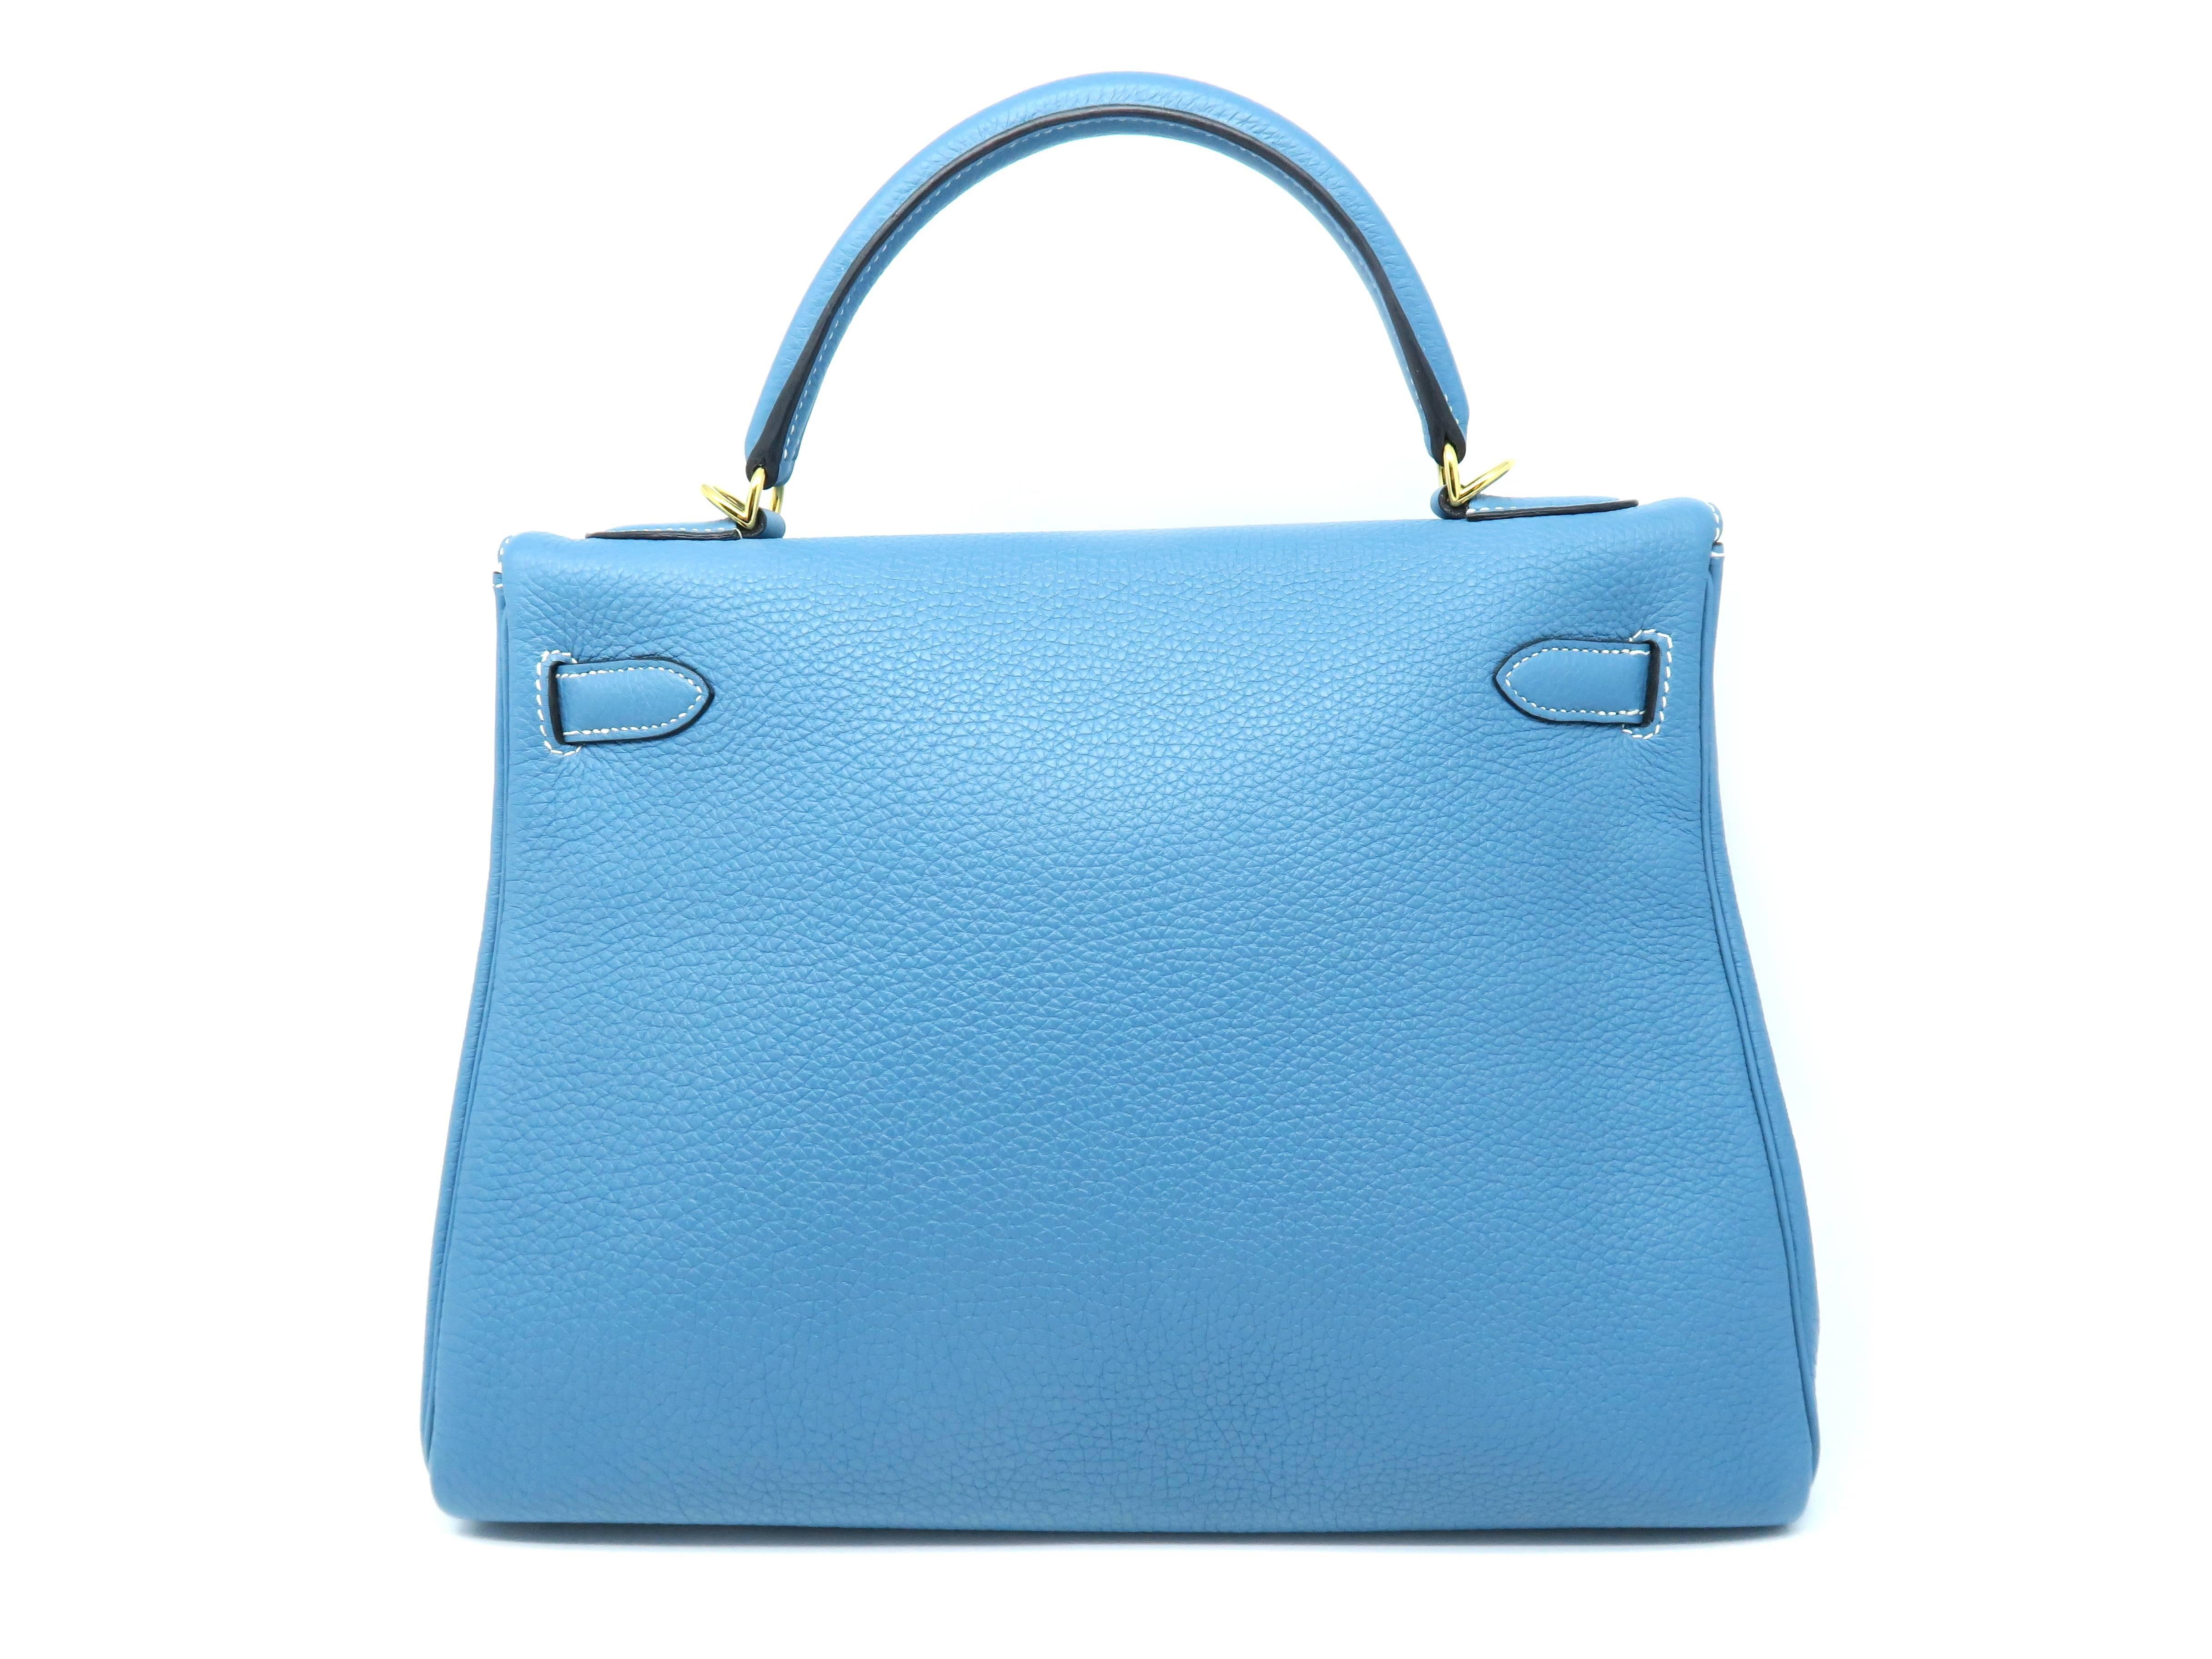 Hermes Kelly 32 Blue / Bleu Jean Togo Leather Satchel Bag In Excellent Condition In Kowloon, HK